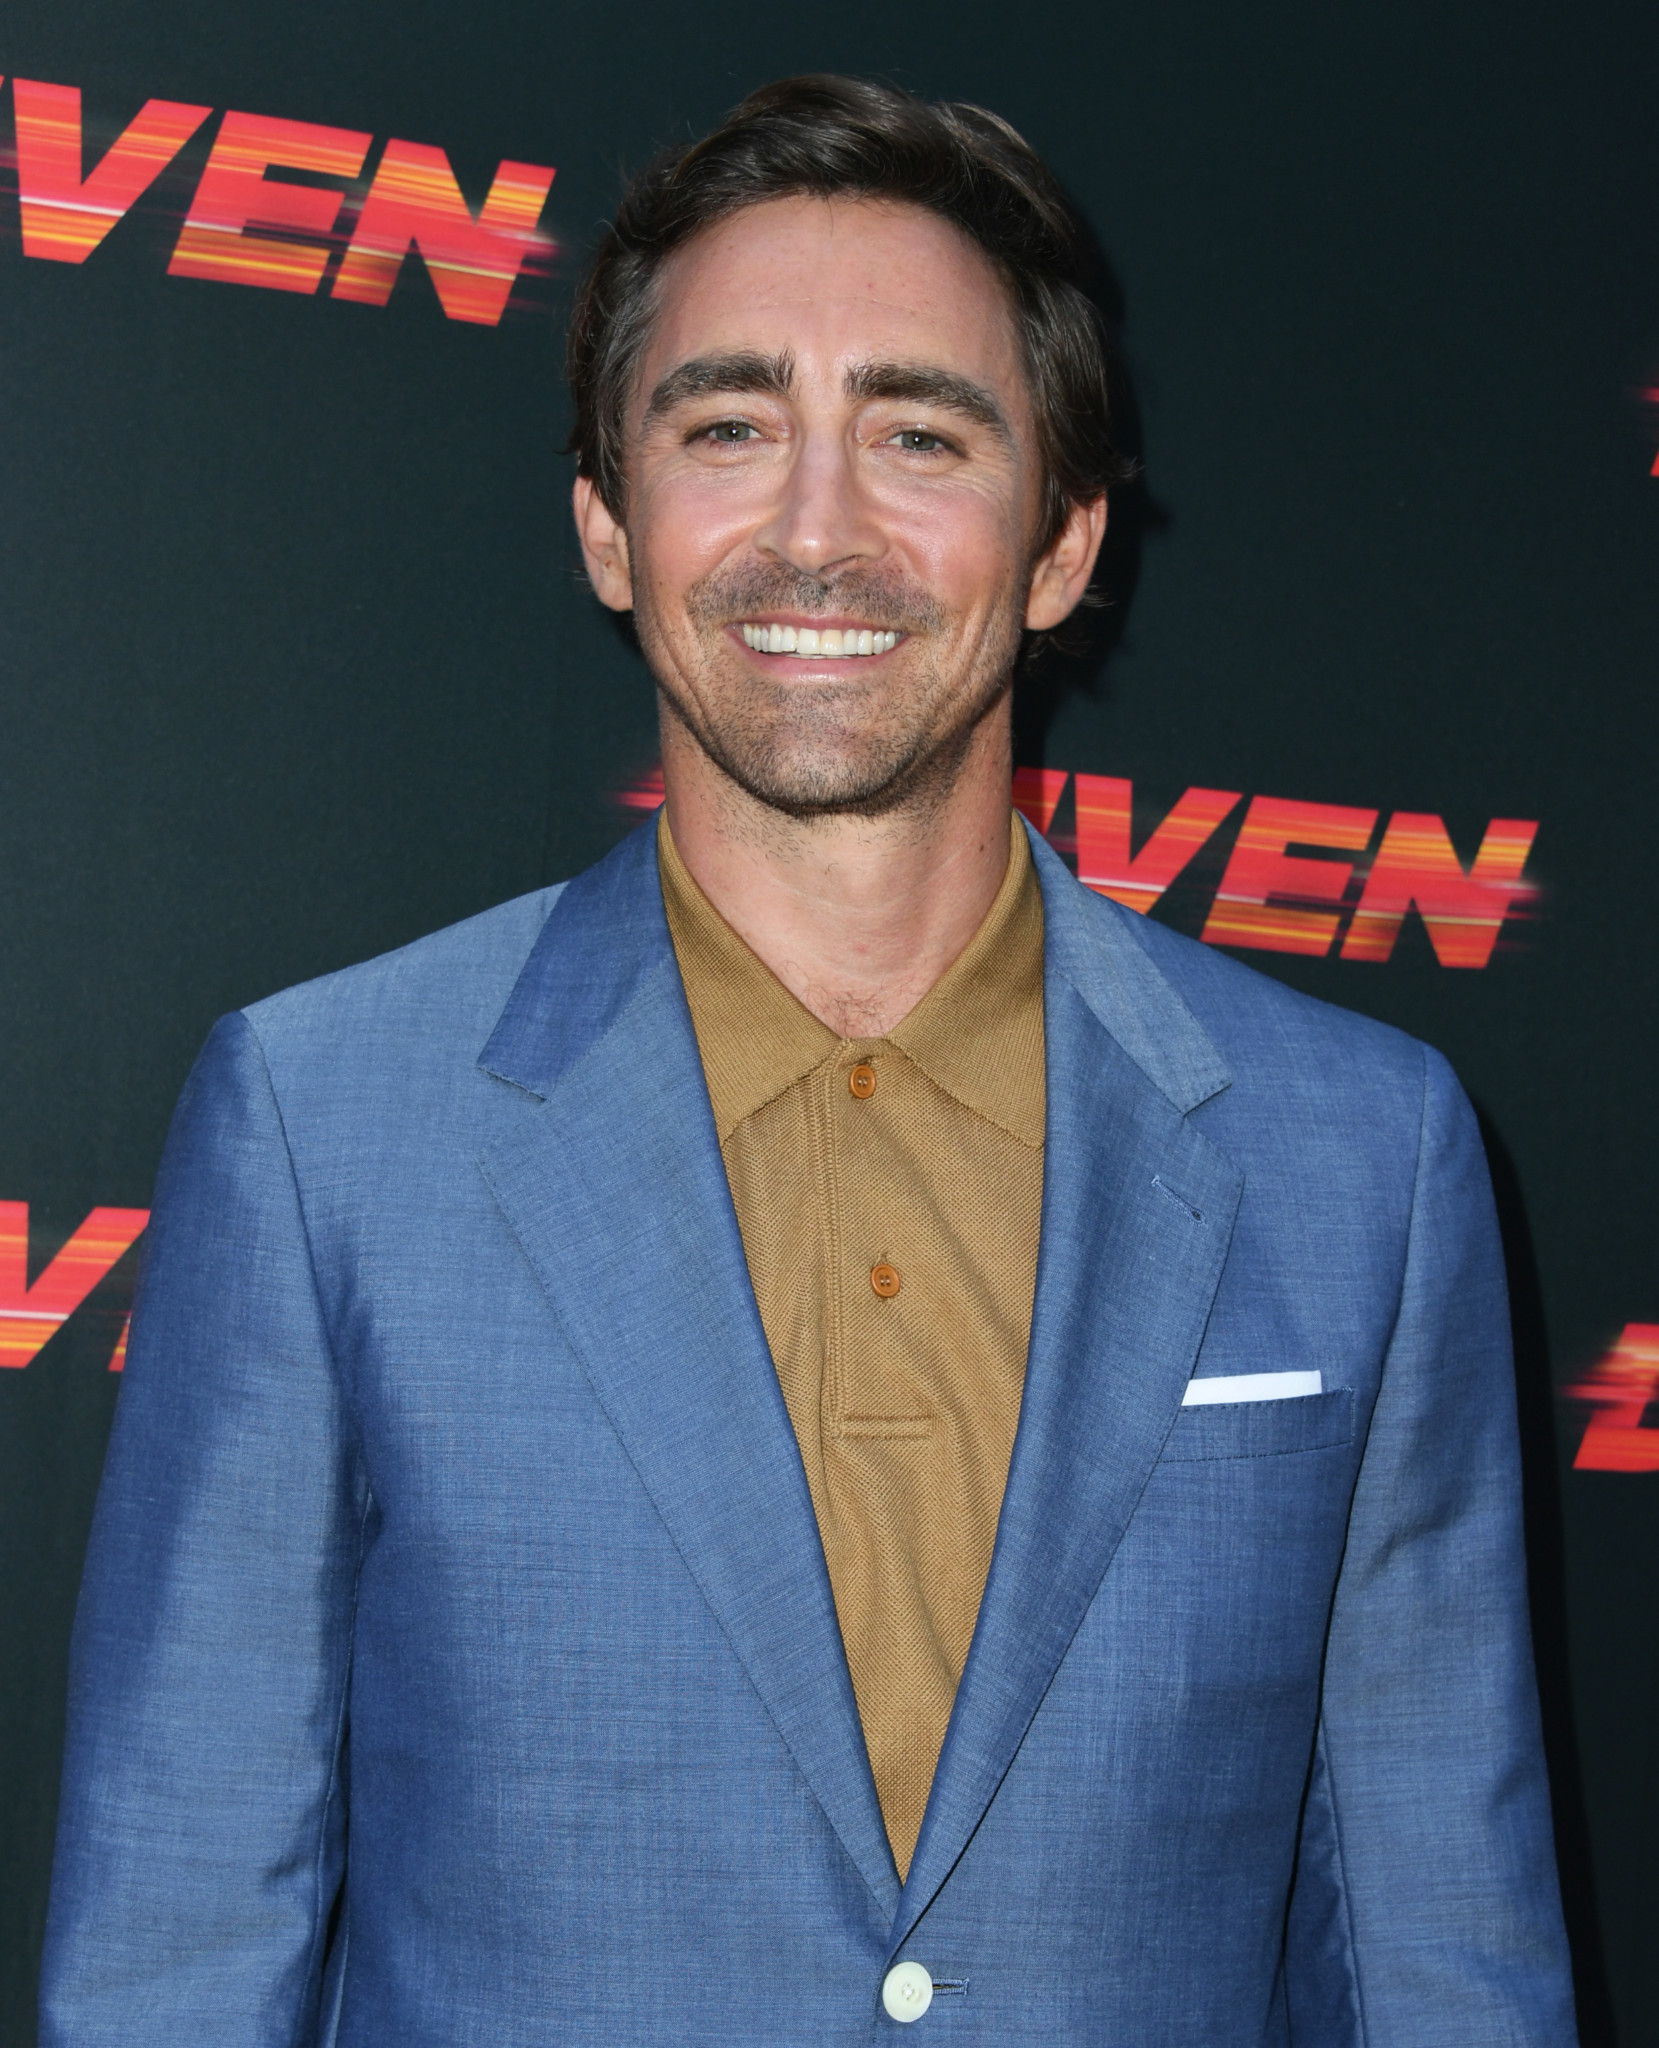 Lee Pace - Actor